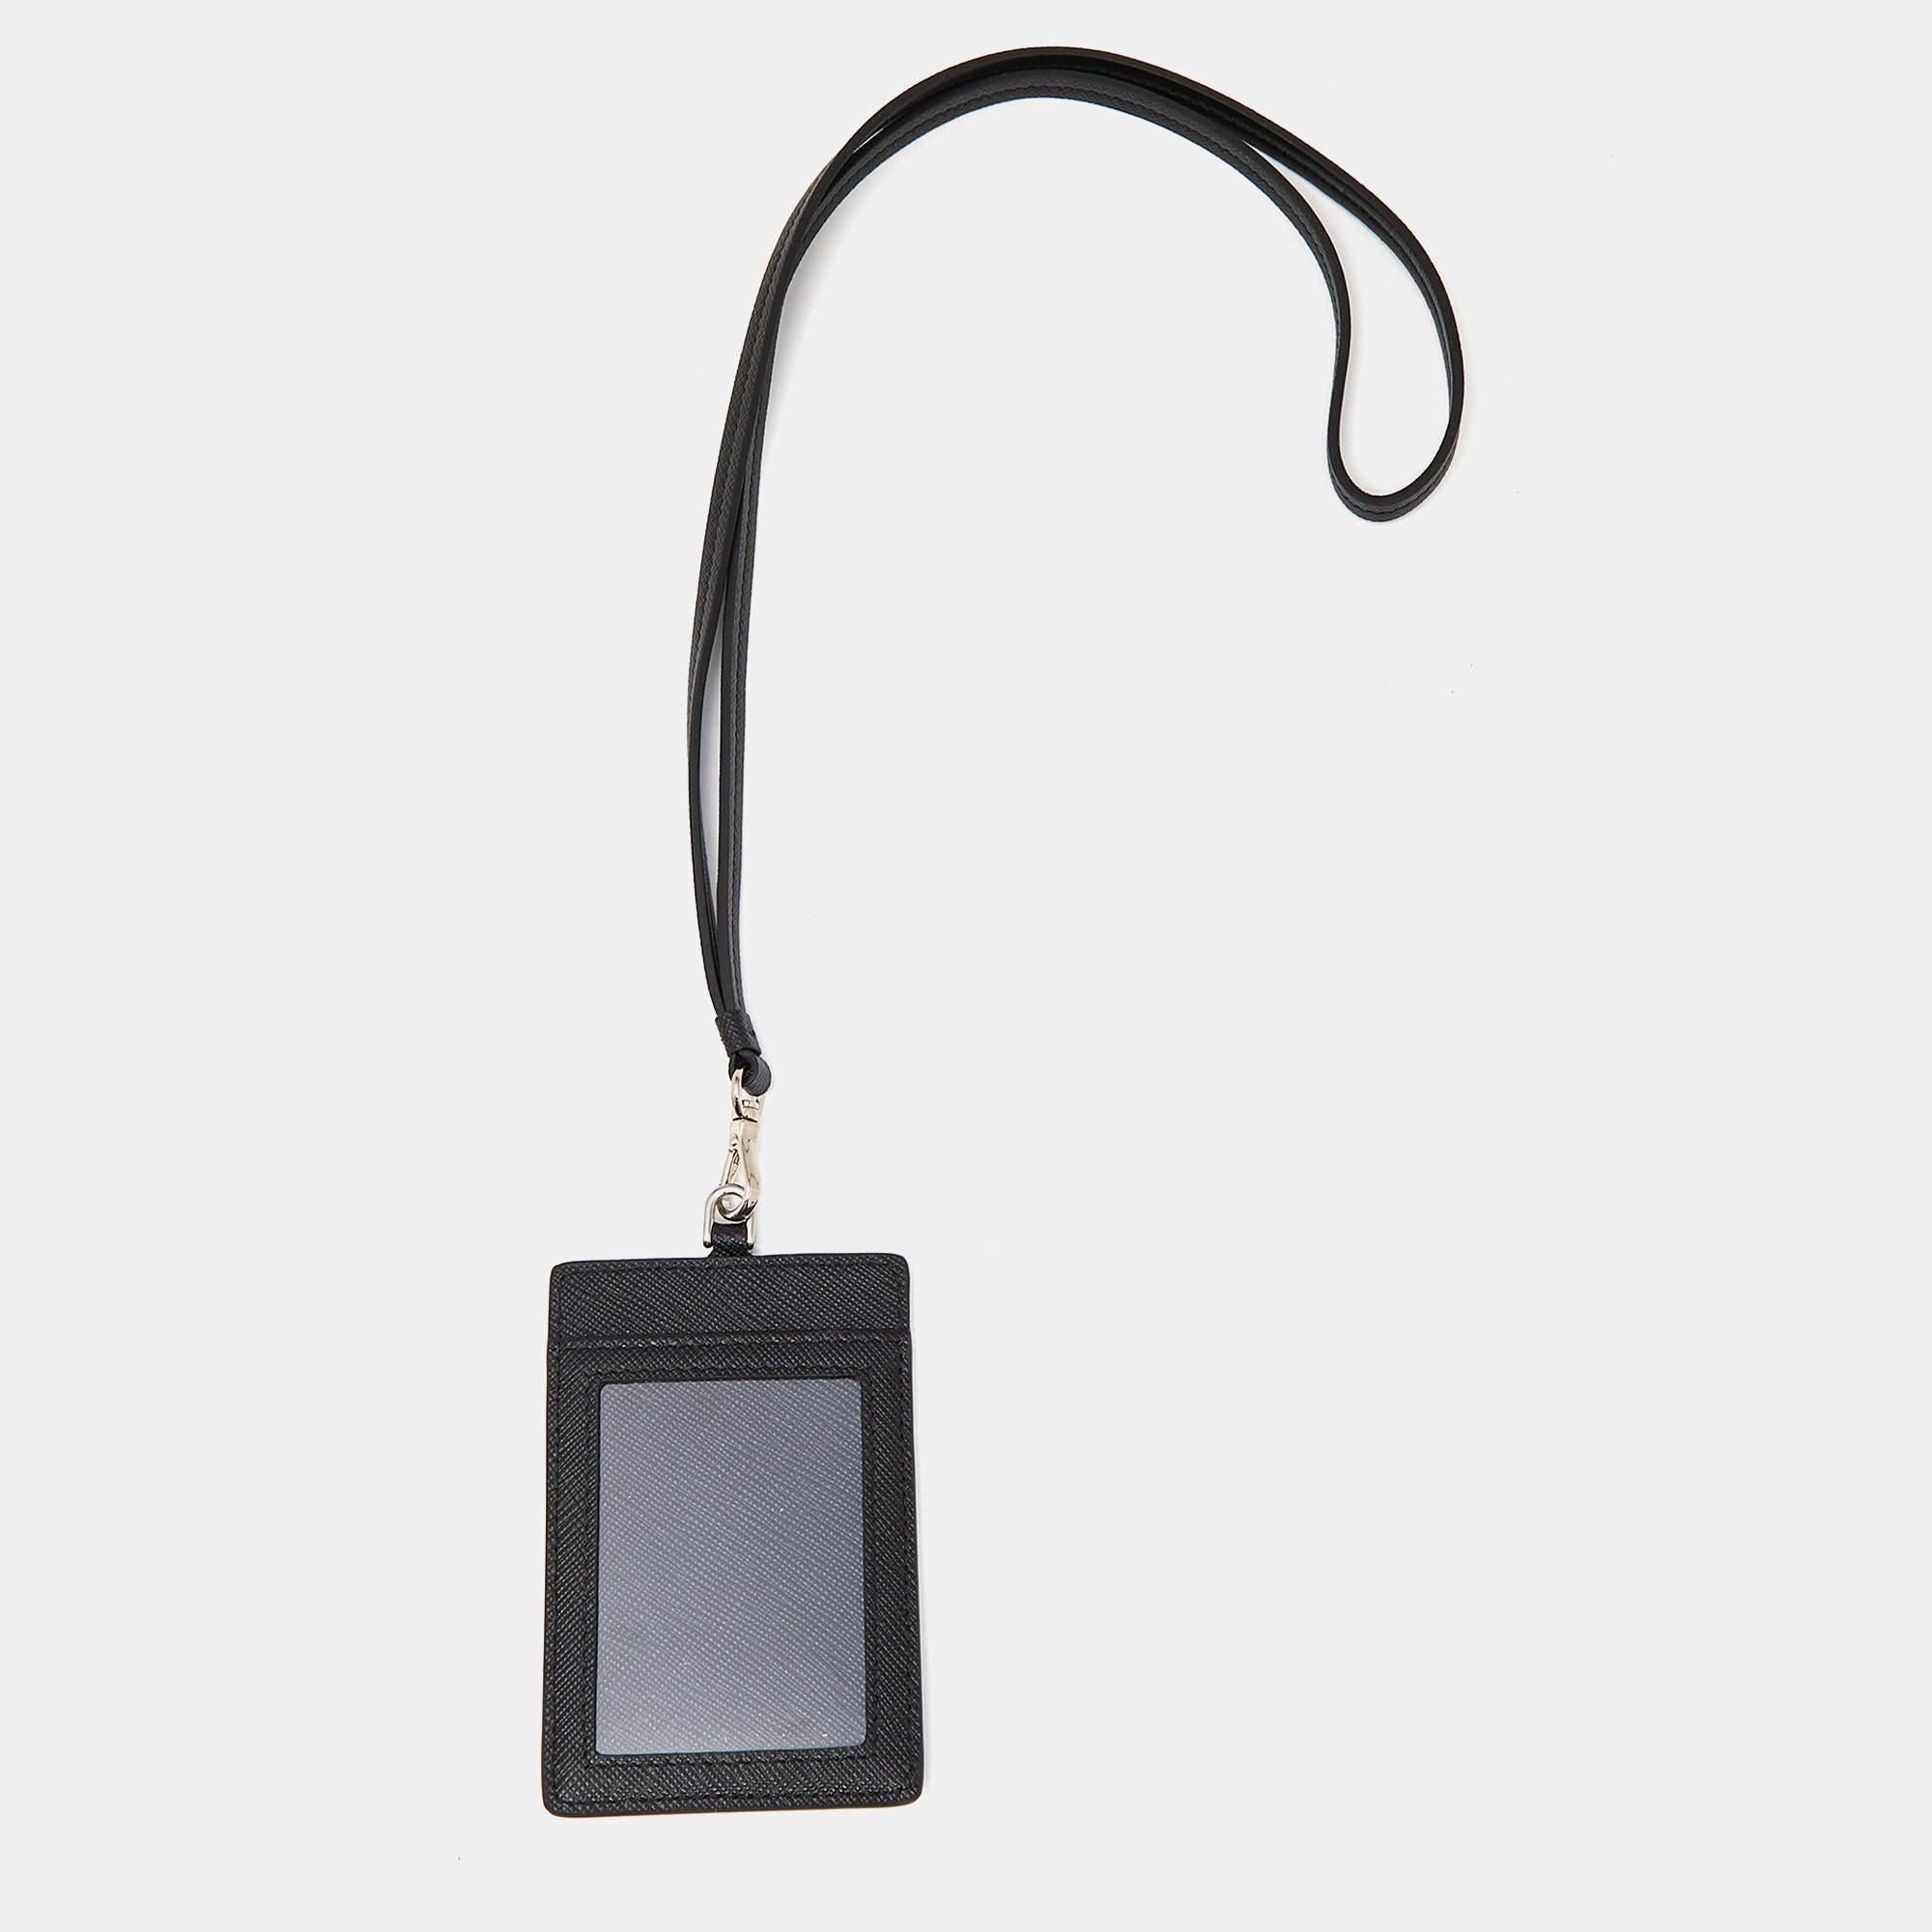 Crafted from luxurious black Saffiano leather, the Prada Badge Holder epitomizes elegance and practicality. Its sleek design boasts a clear ID window and multiple card slots, perfect for organizing essentials with finesse. A discreet Prada logo adds